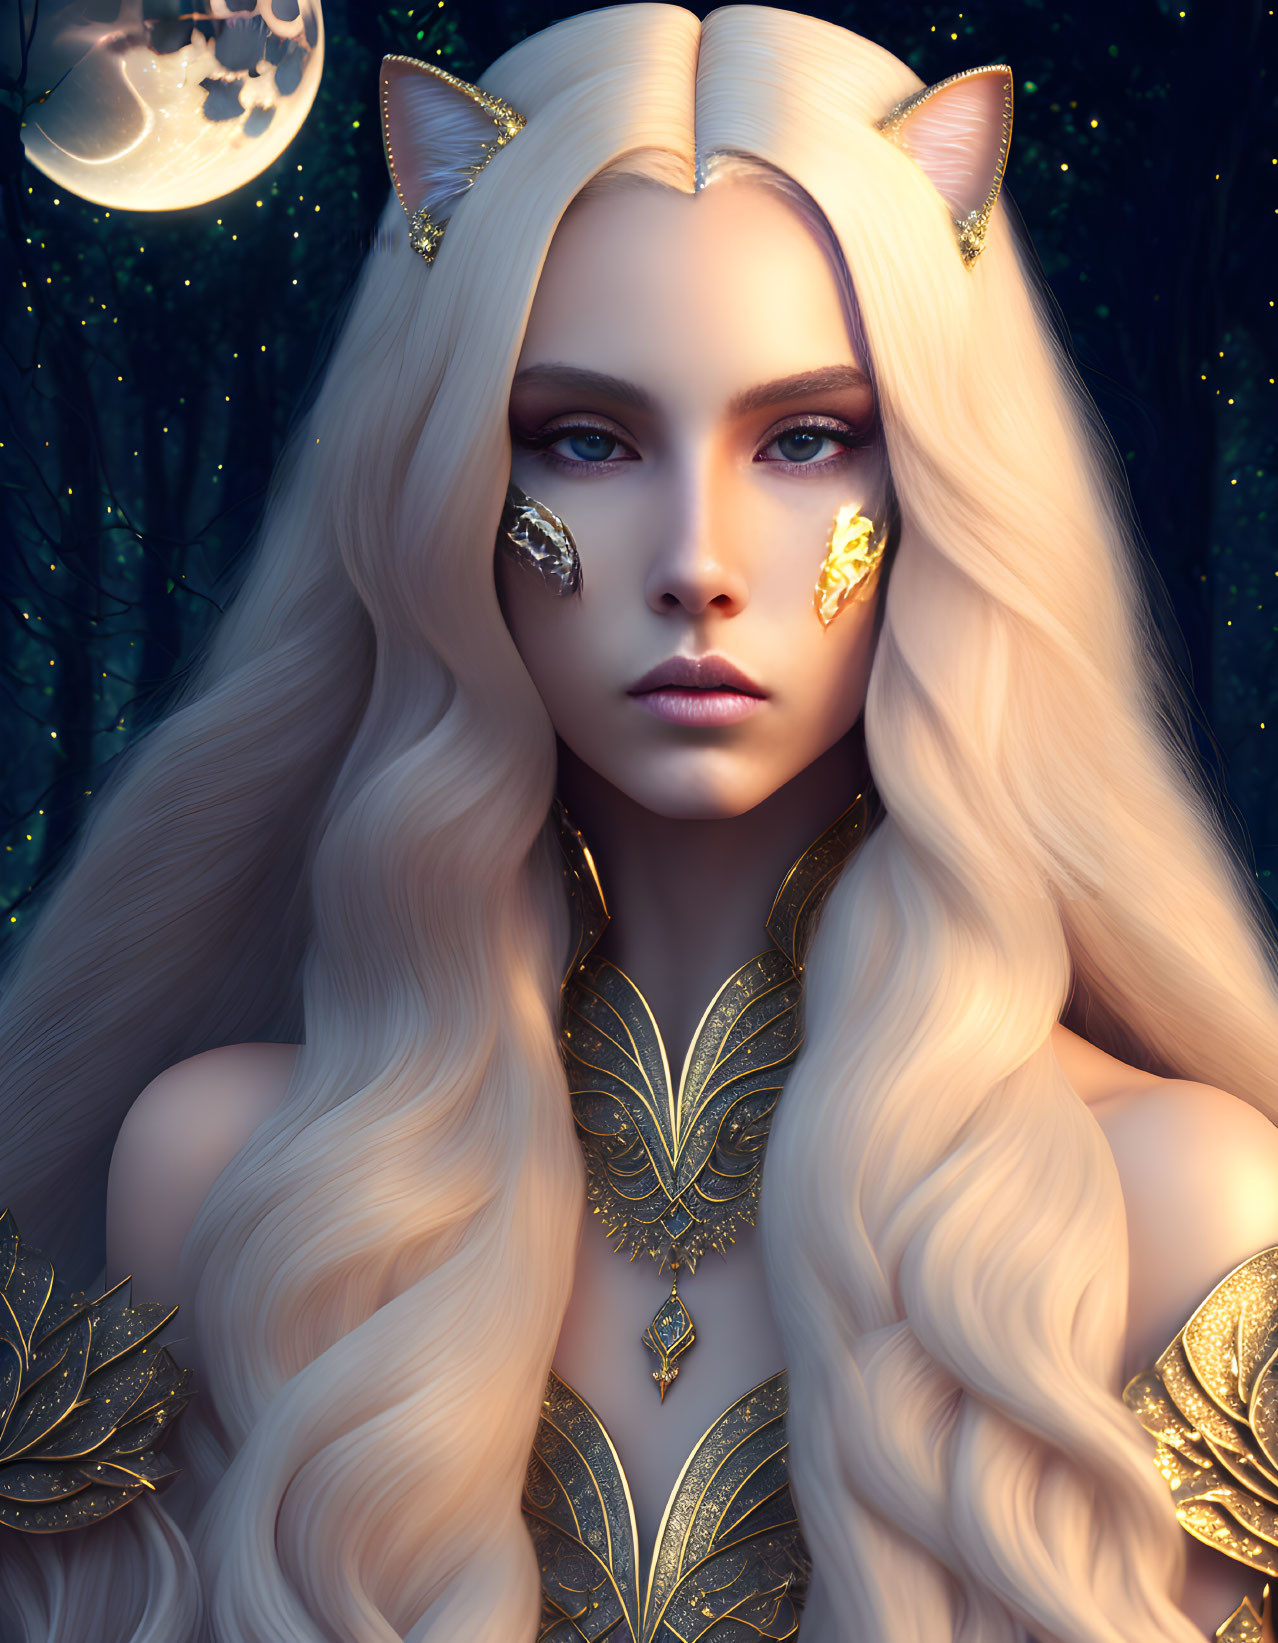 Blonde woman with cat ears and golden leaf makeup under crescent moon